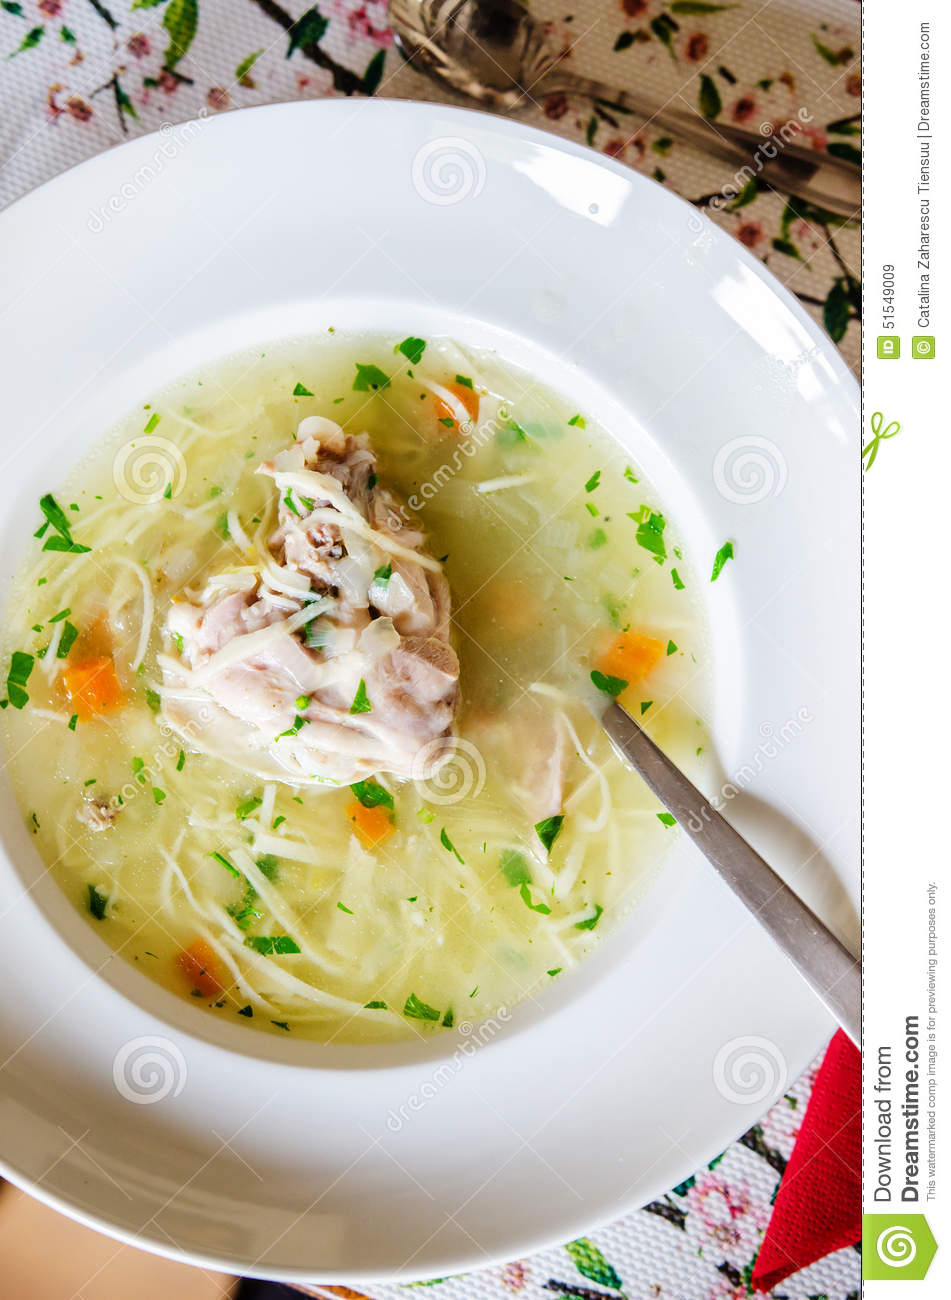 Hot Chicken Soup With Home Made Noodles And Parsley